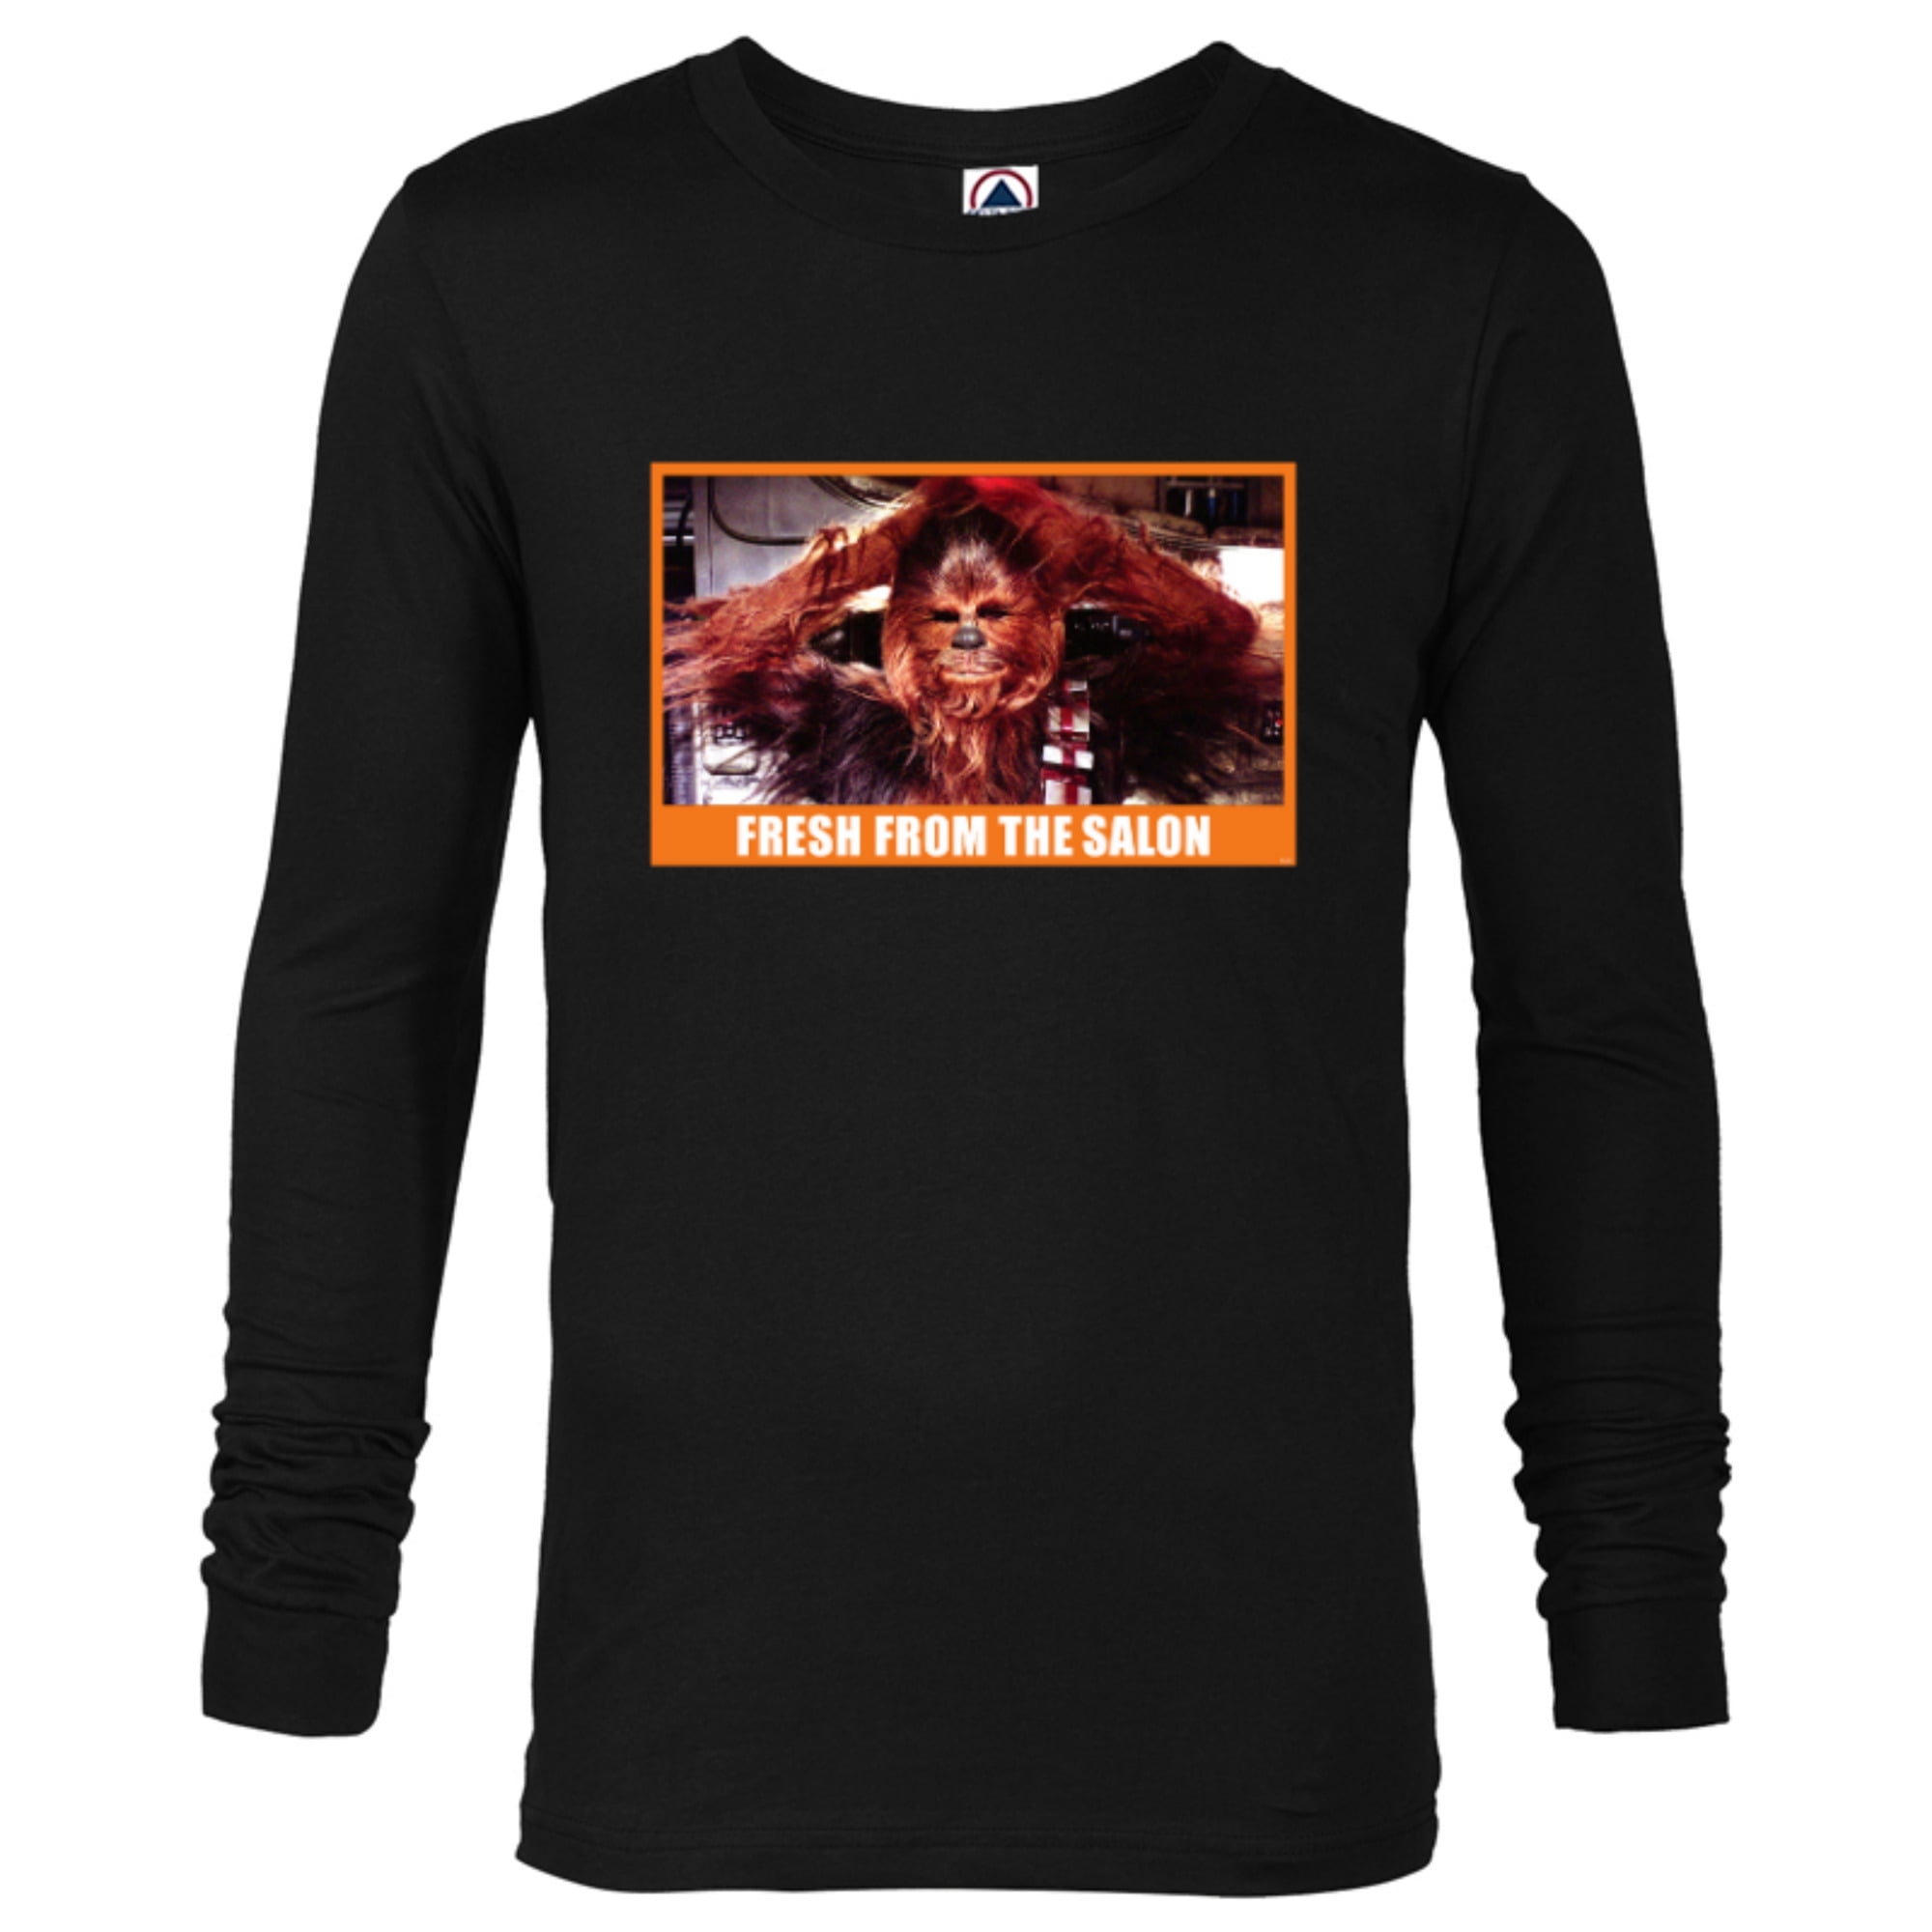 Fresh Wars Chewbacca Salon Funny from Sleeve Customized-Black - - Men Shirt Star Long Wookiee T- Meme the for